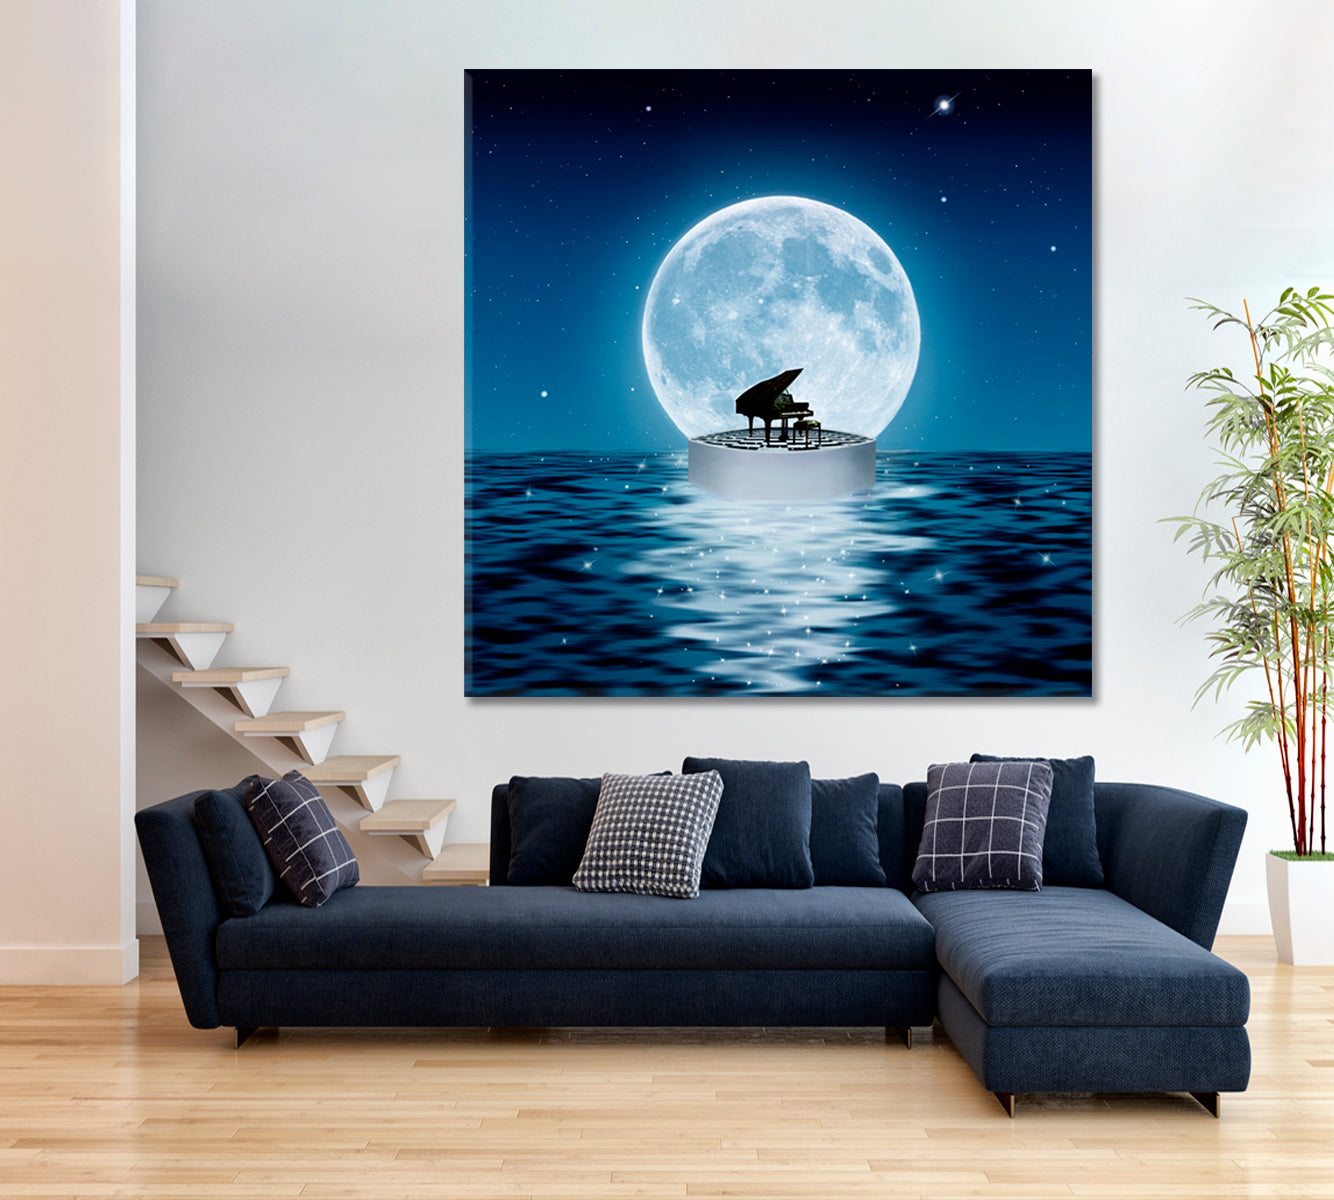 OCEAN AT NIGHT Piano Floating Surreal Fantasy Large Art Print Décor Artesty   